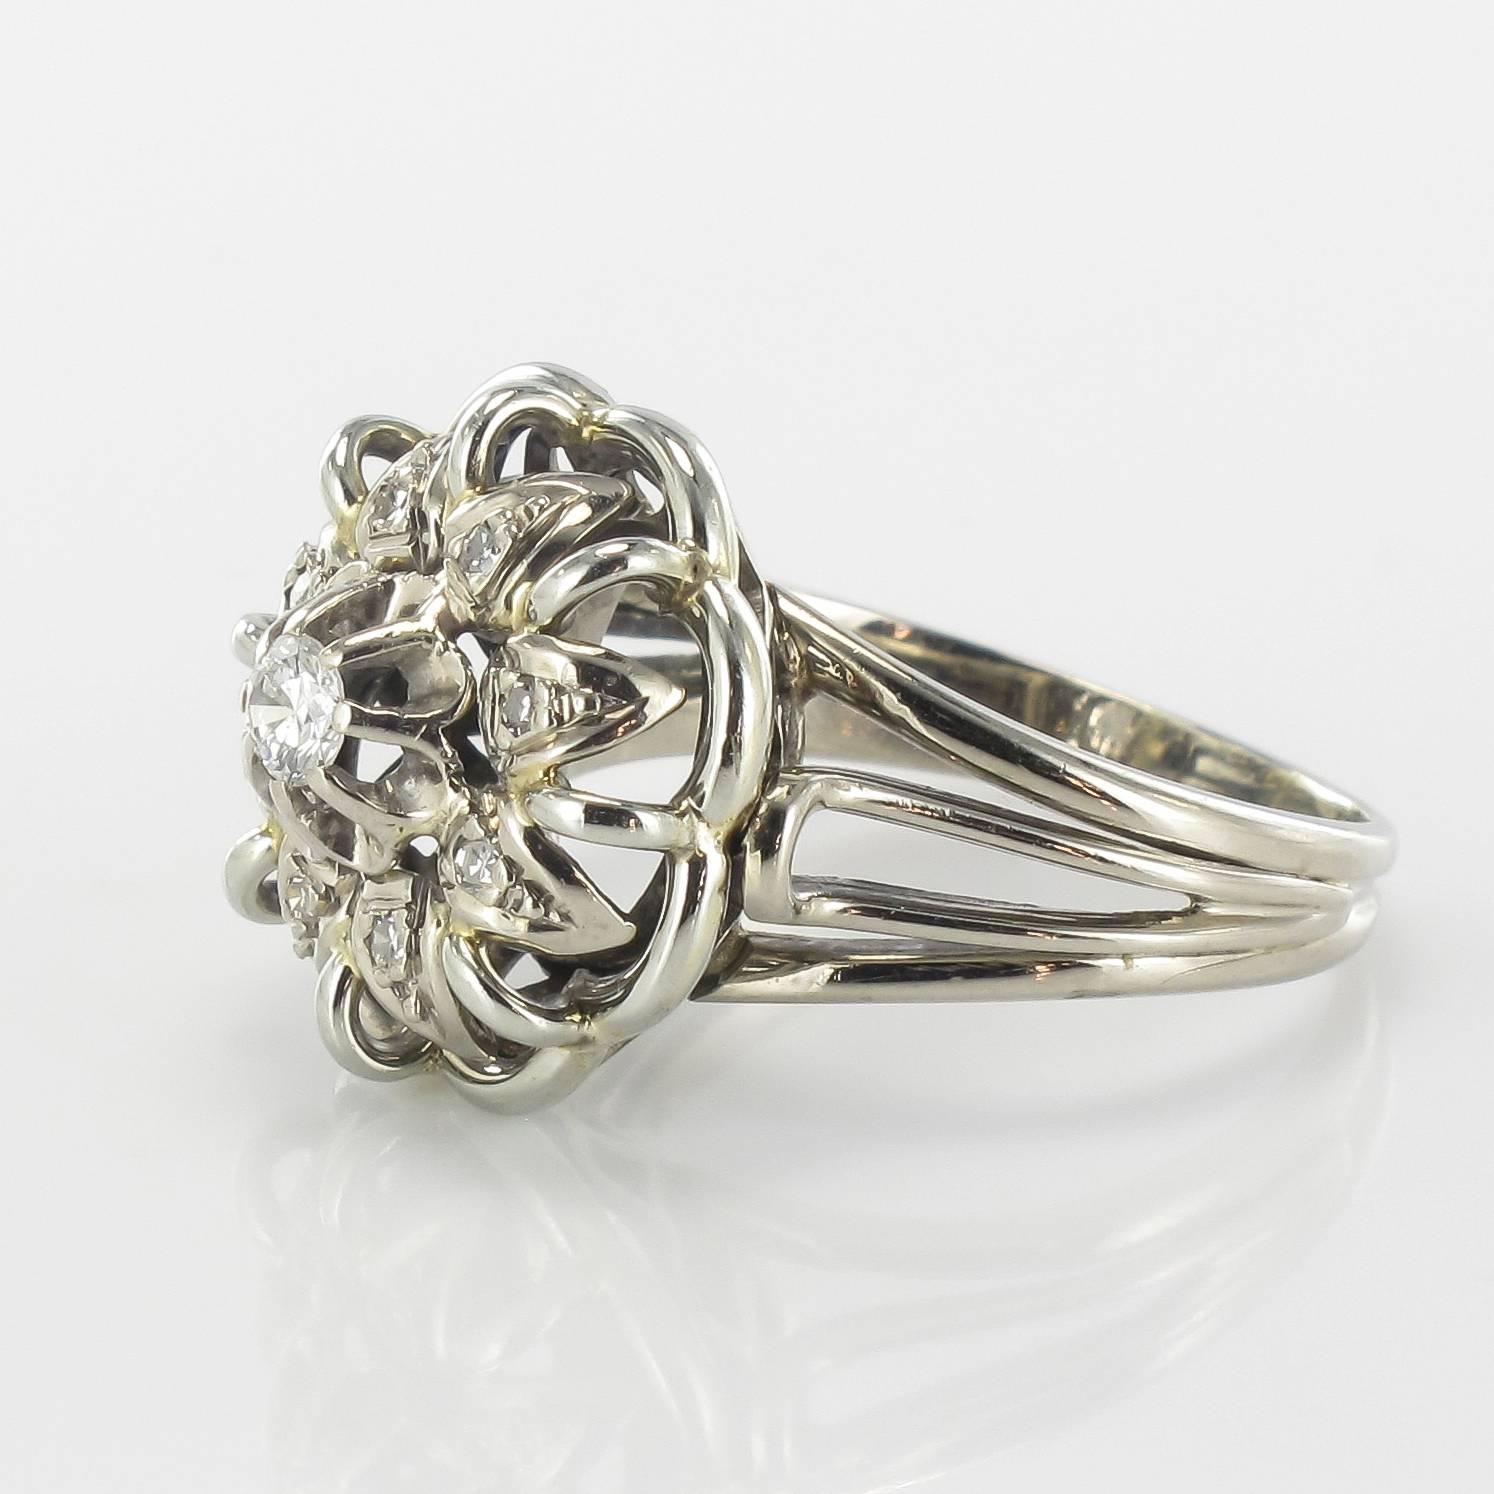 Ring in 18 carat white gold, eagle head hallmark. 

This splendid antique diamond ring features a central claw set modern brilliant cut diamond which is edged by a strand of white gold with 8 brilliant cut diamonds in a geometric pattern. The bed